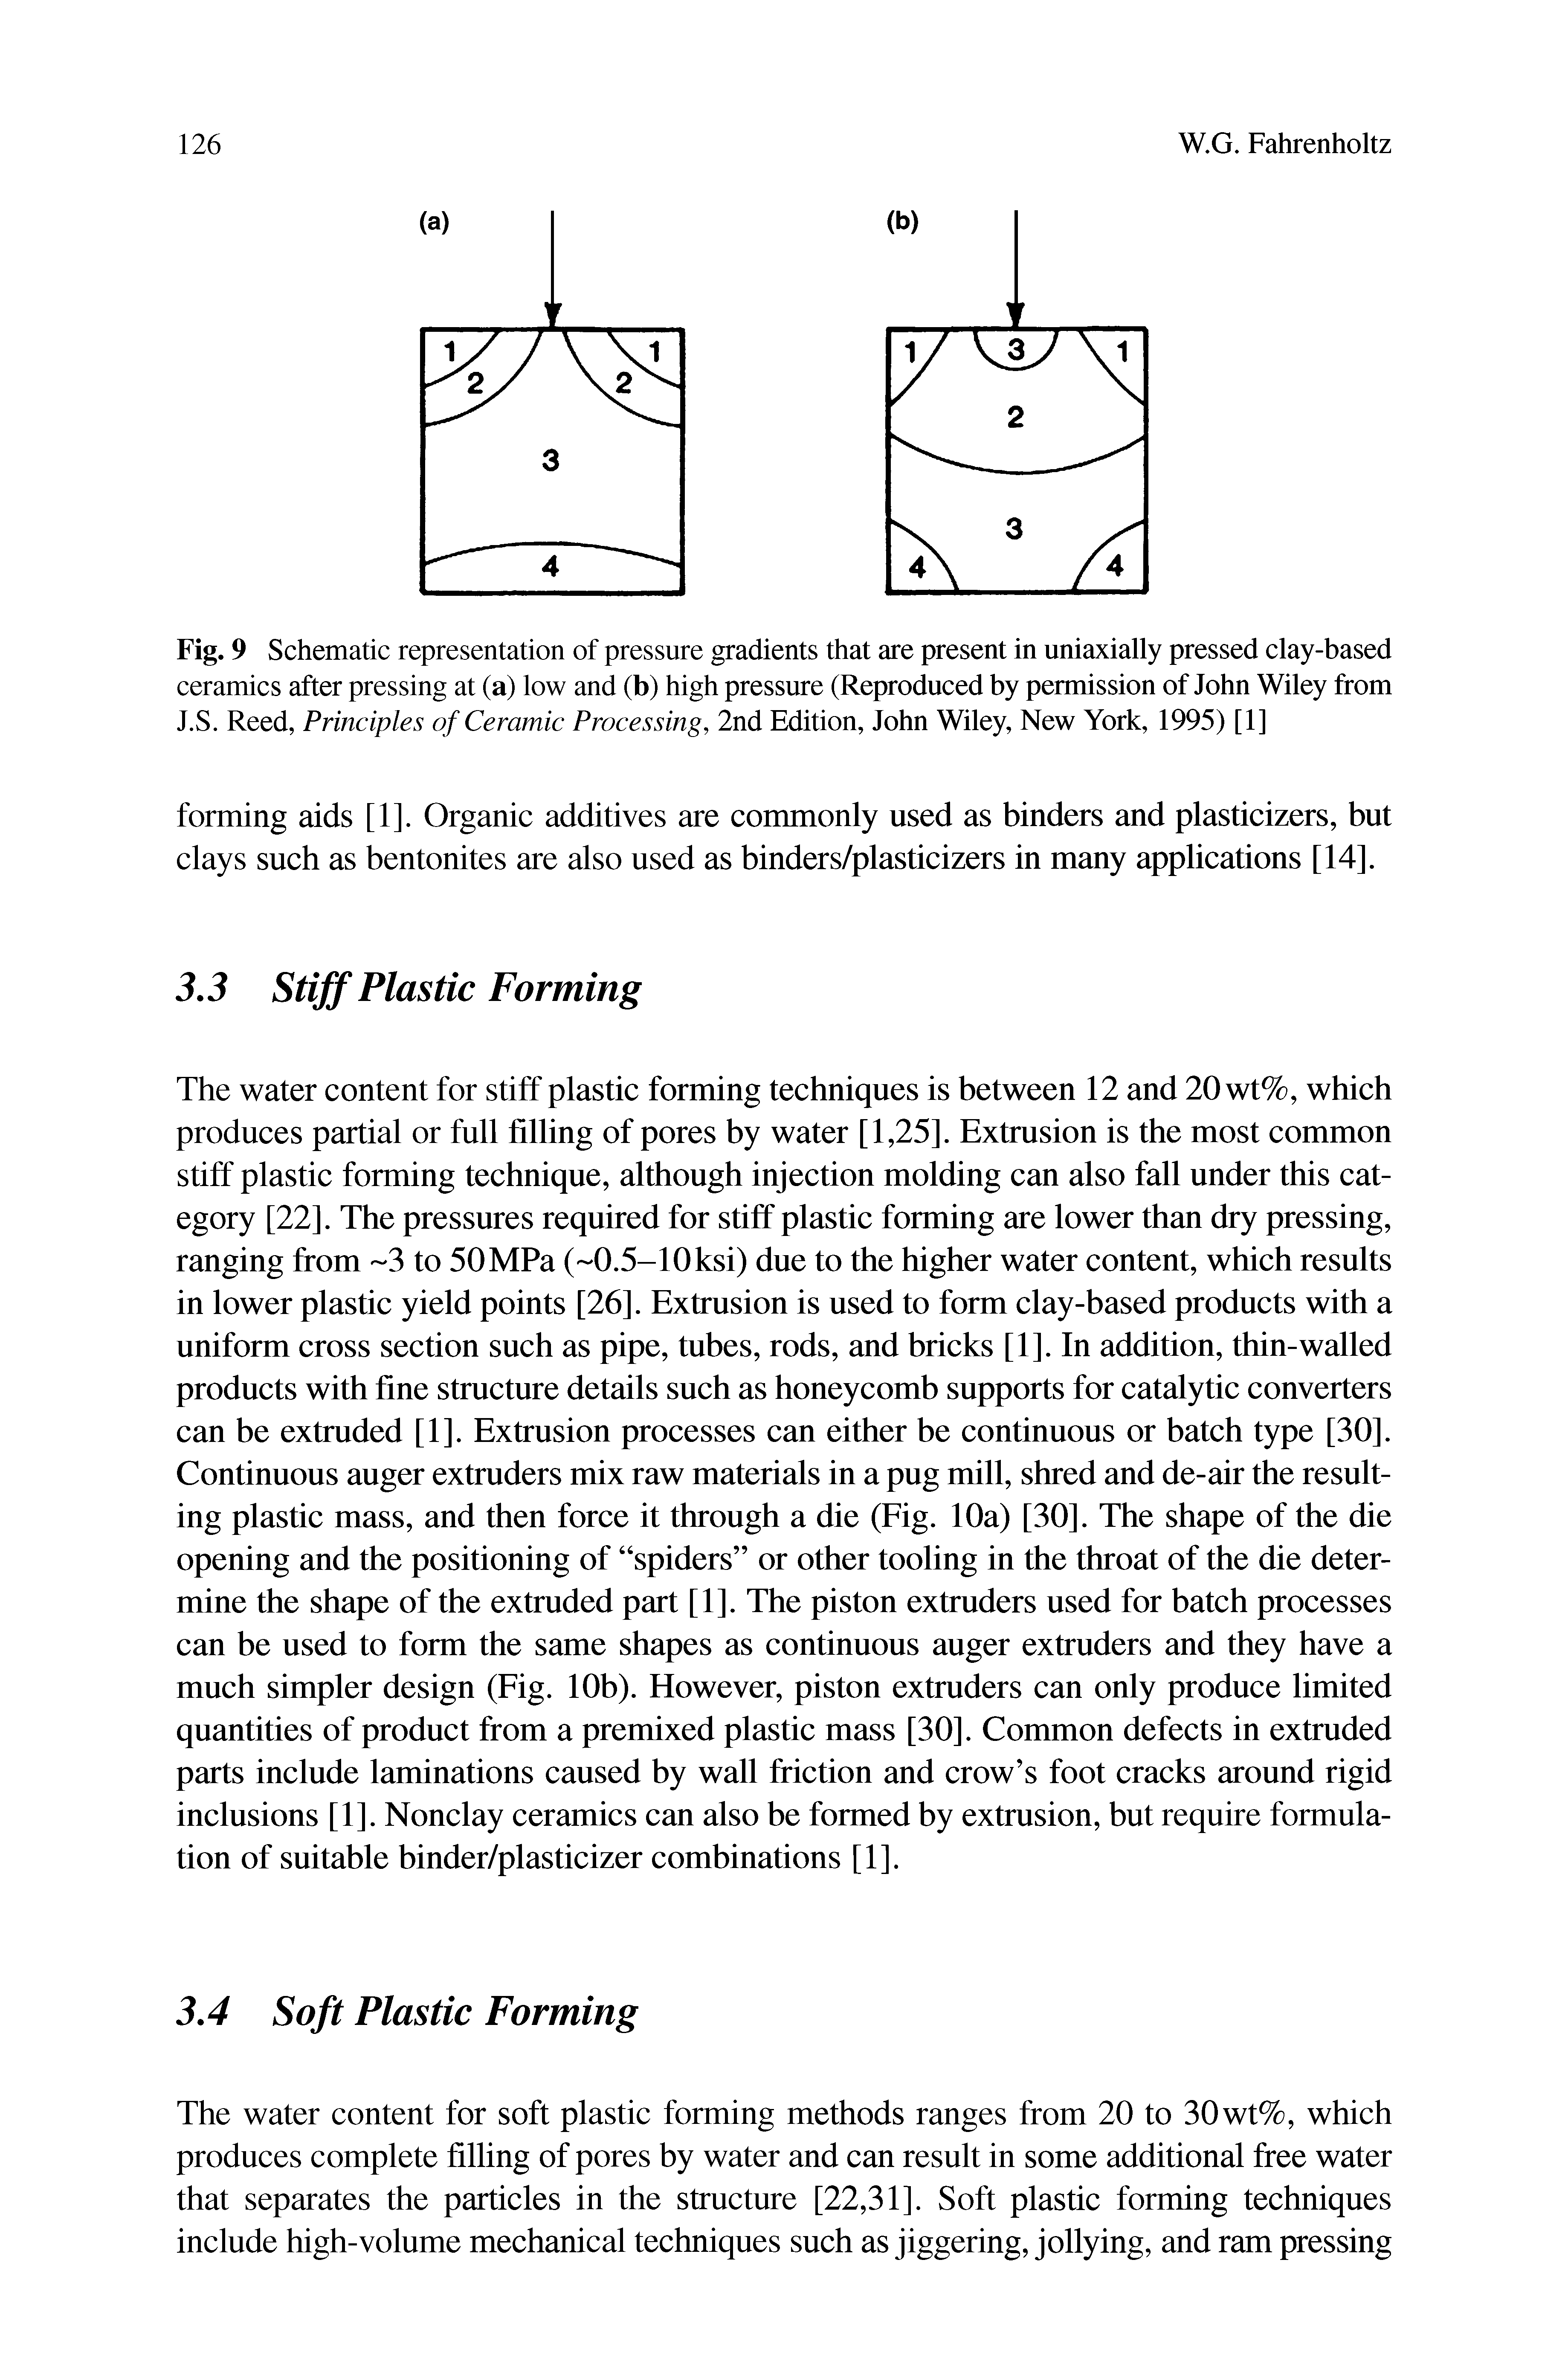 Fig. 9 Schematic representation of pressure gradients that are present in uniaxially pressed clay-based ceramics after pressing at (a) low and (b) high pressure (Reproduced by permission of John Wiley from J.S. Reed, Principles of Ceramic Processing, 2nd Edition, John Wiley, New York, 1995) [1]...